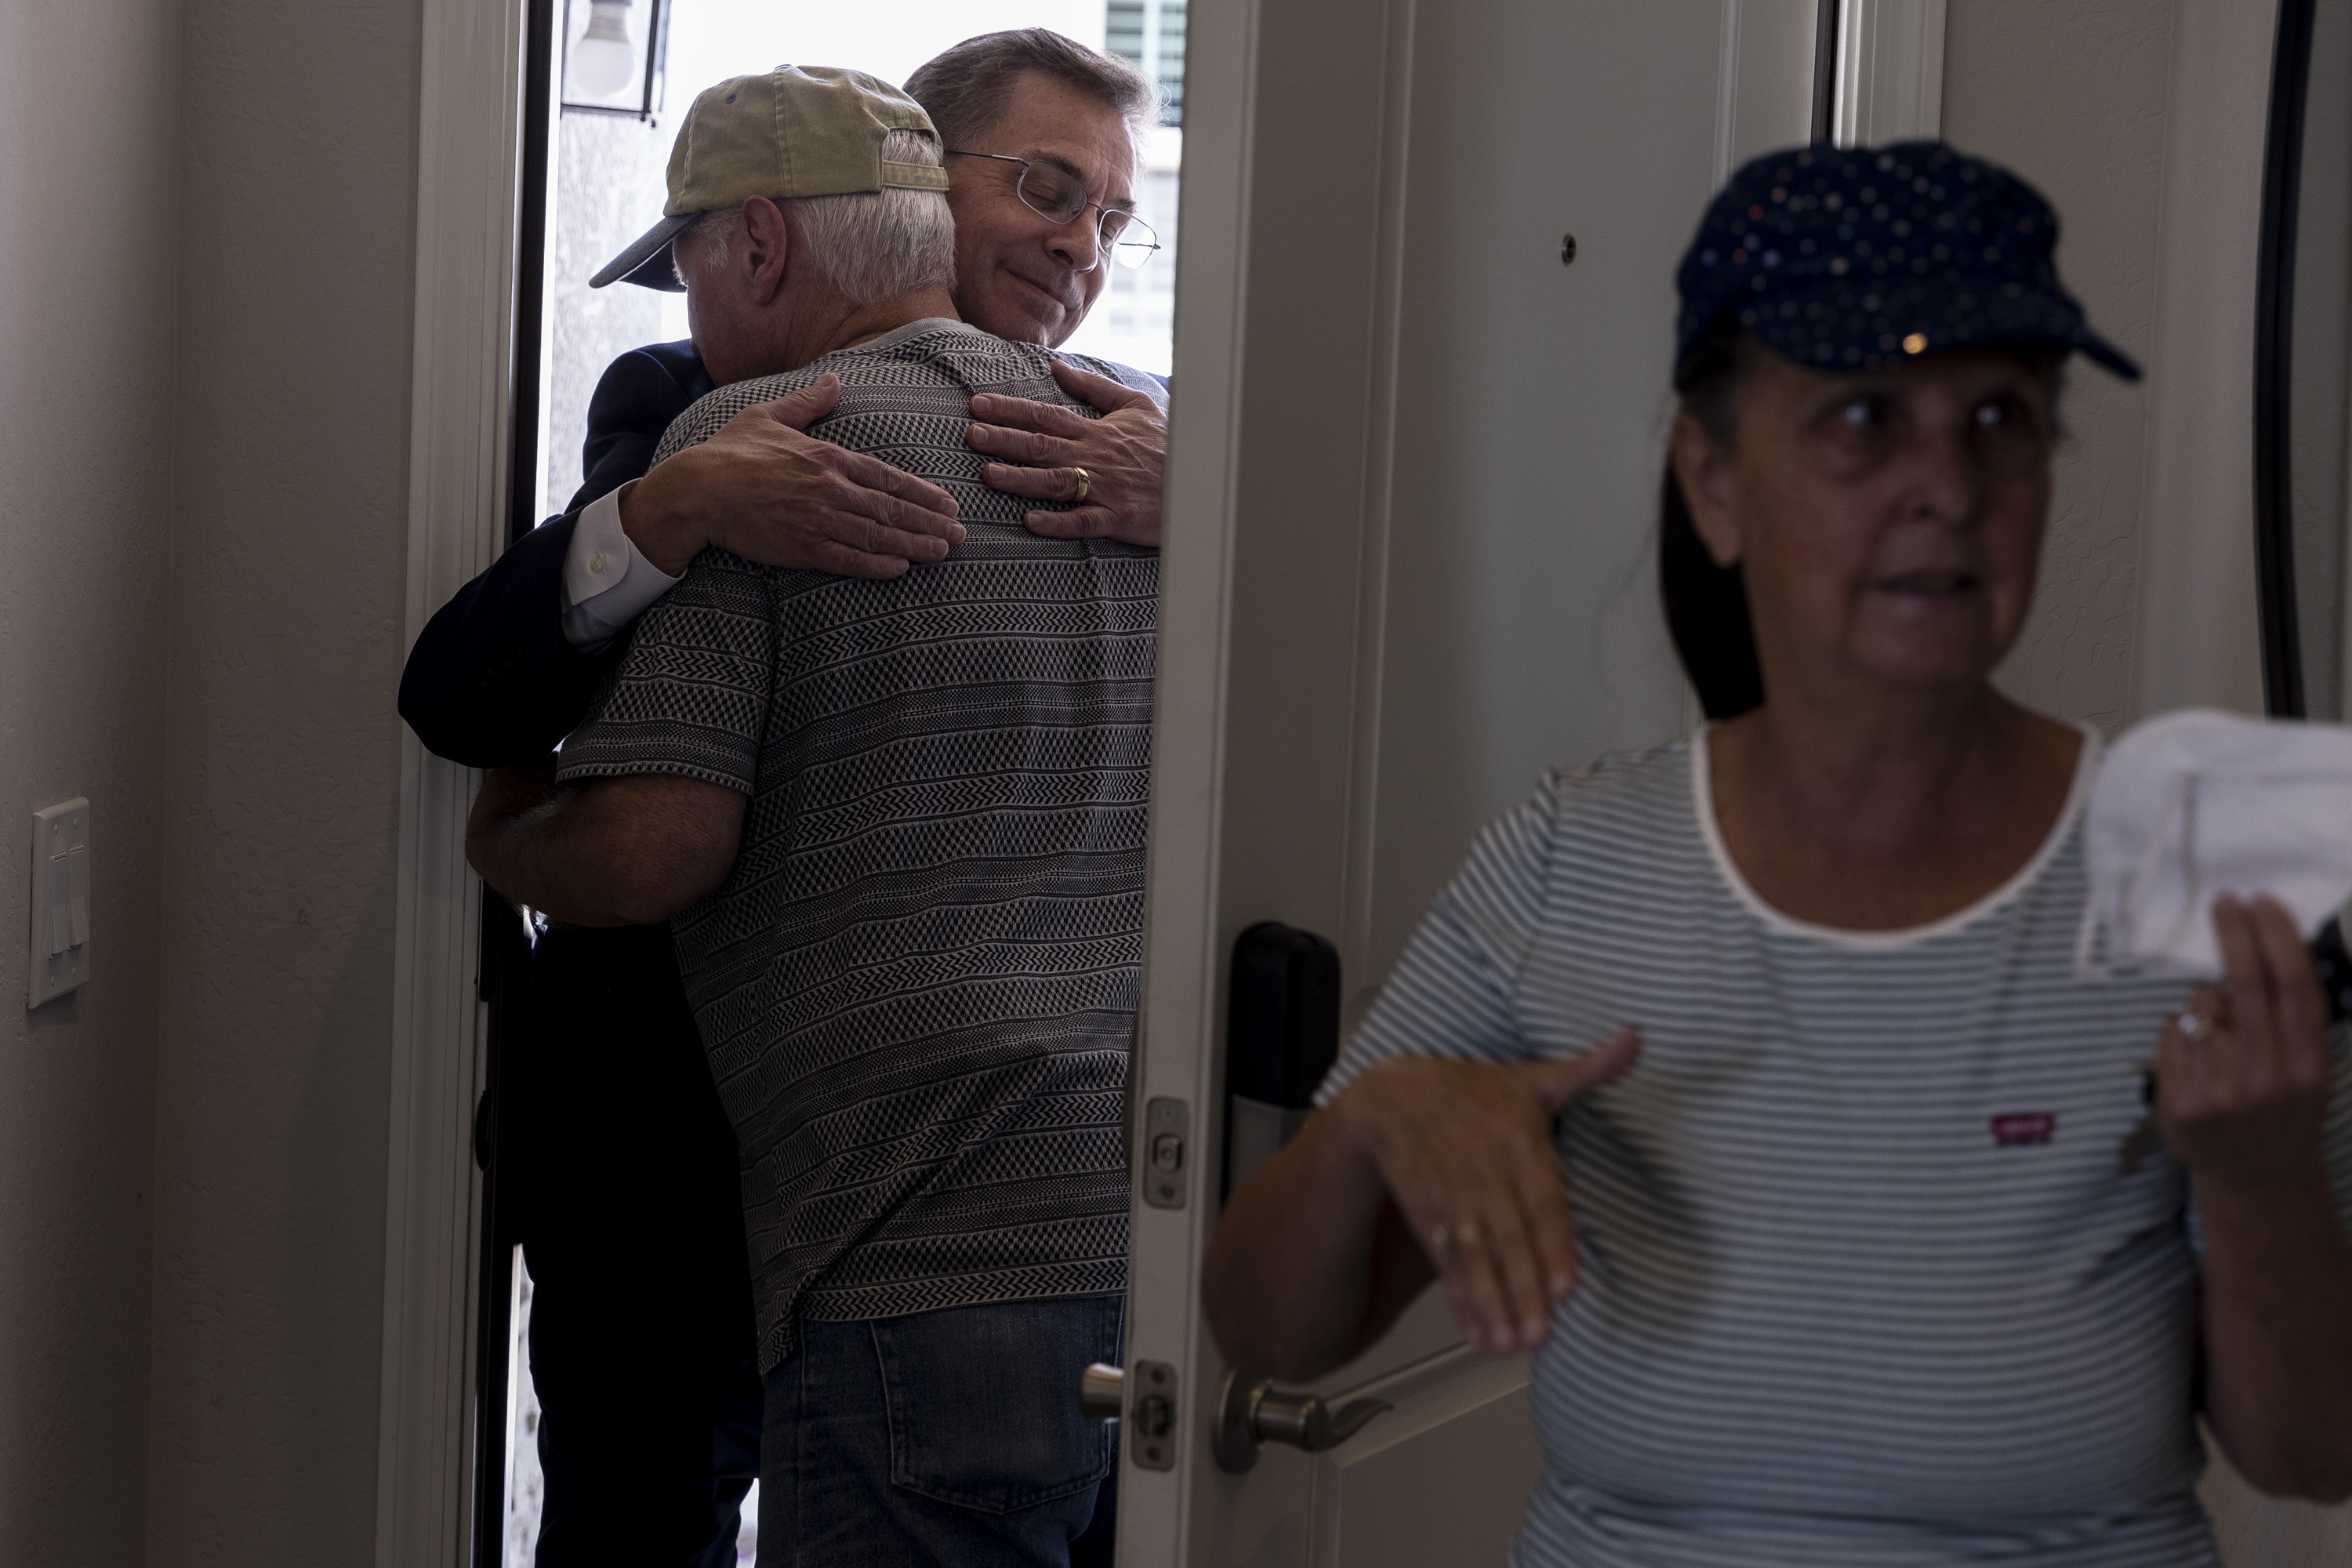 Cancer patient Jac Conant hugs Todd Wood, CEO of Christopher Todd Communities, after touring his new home